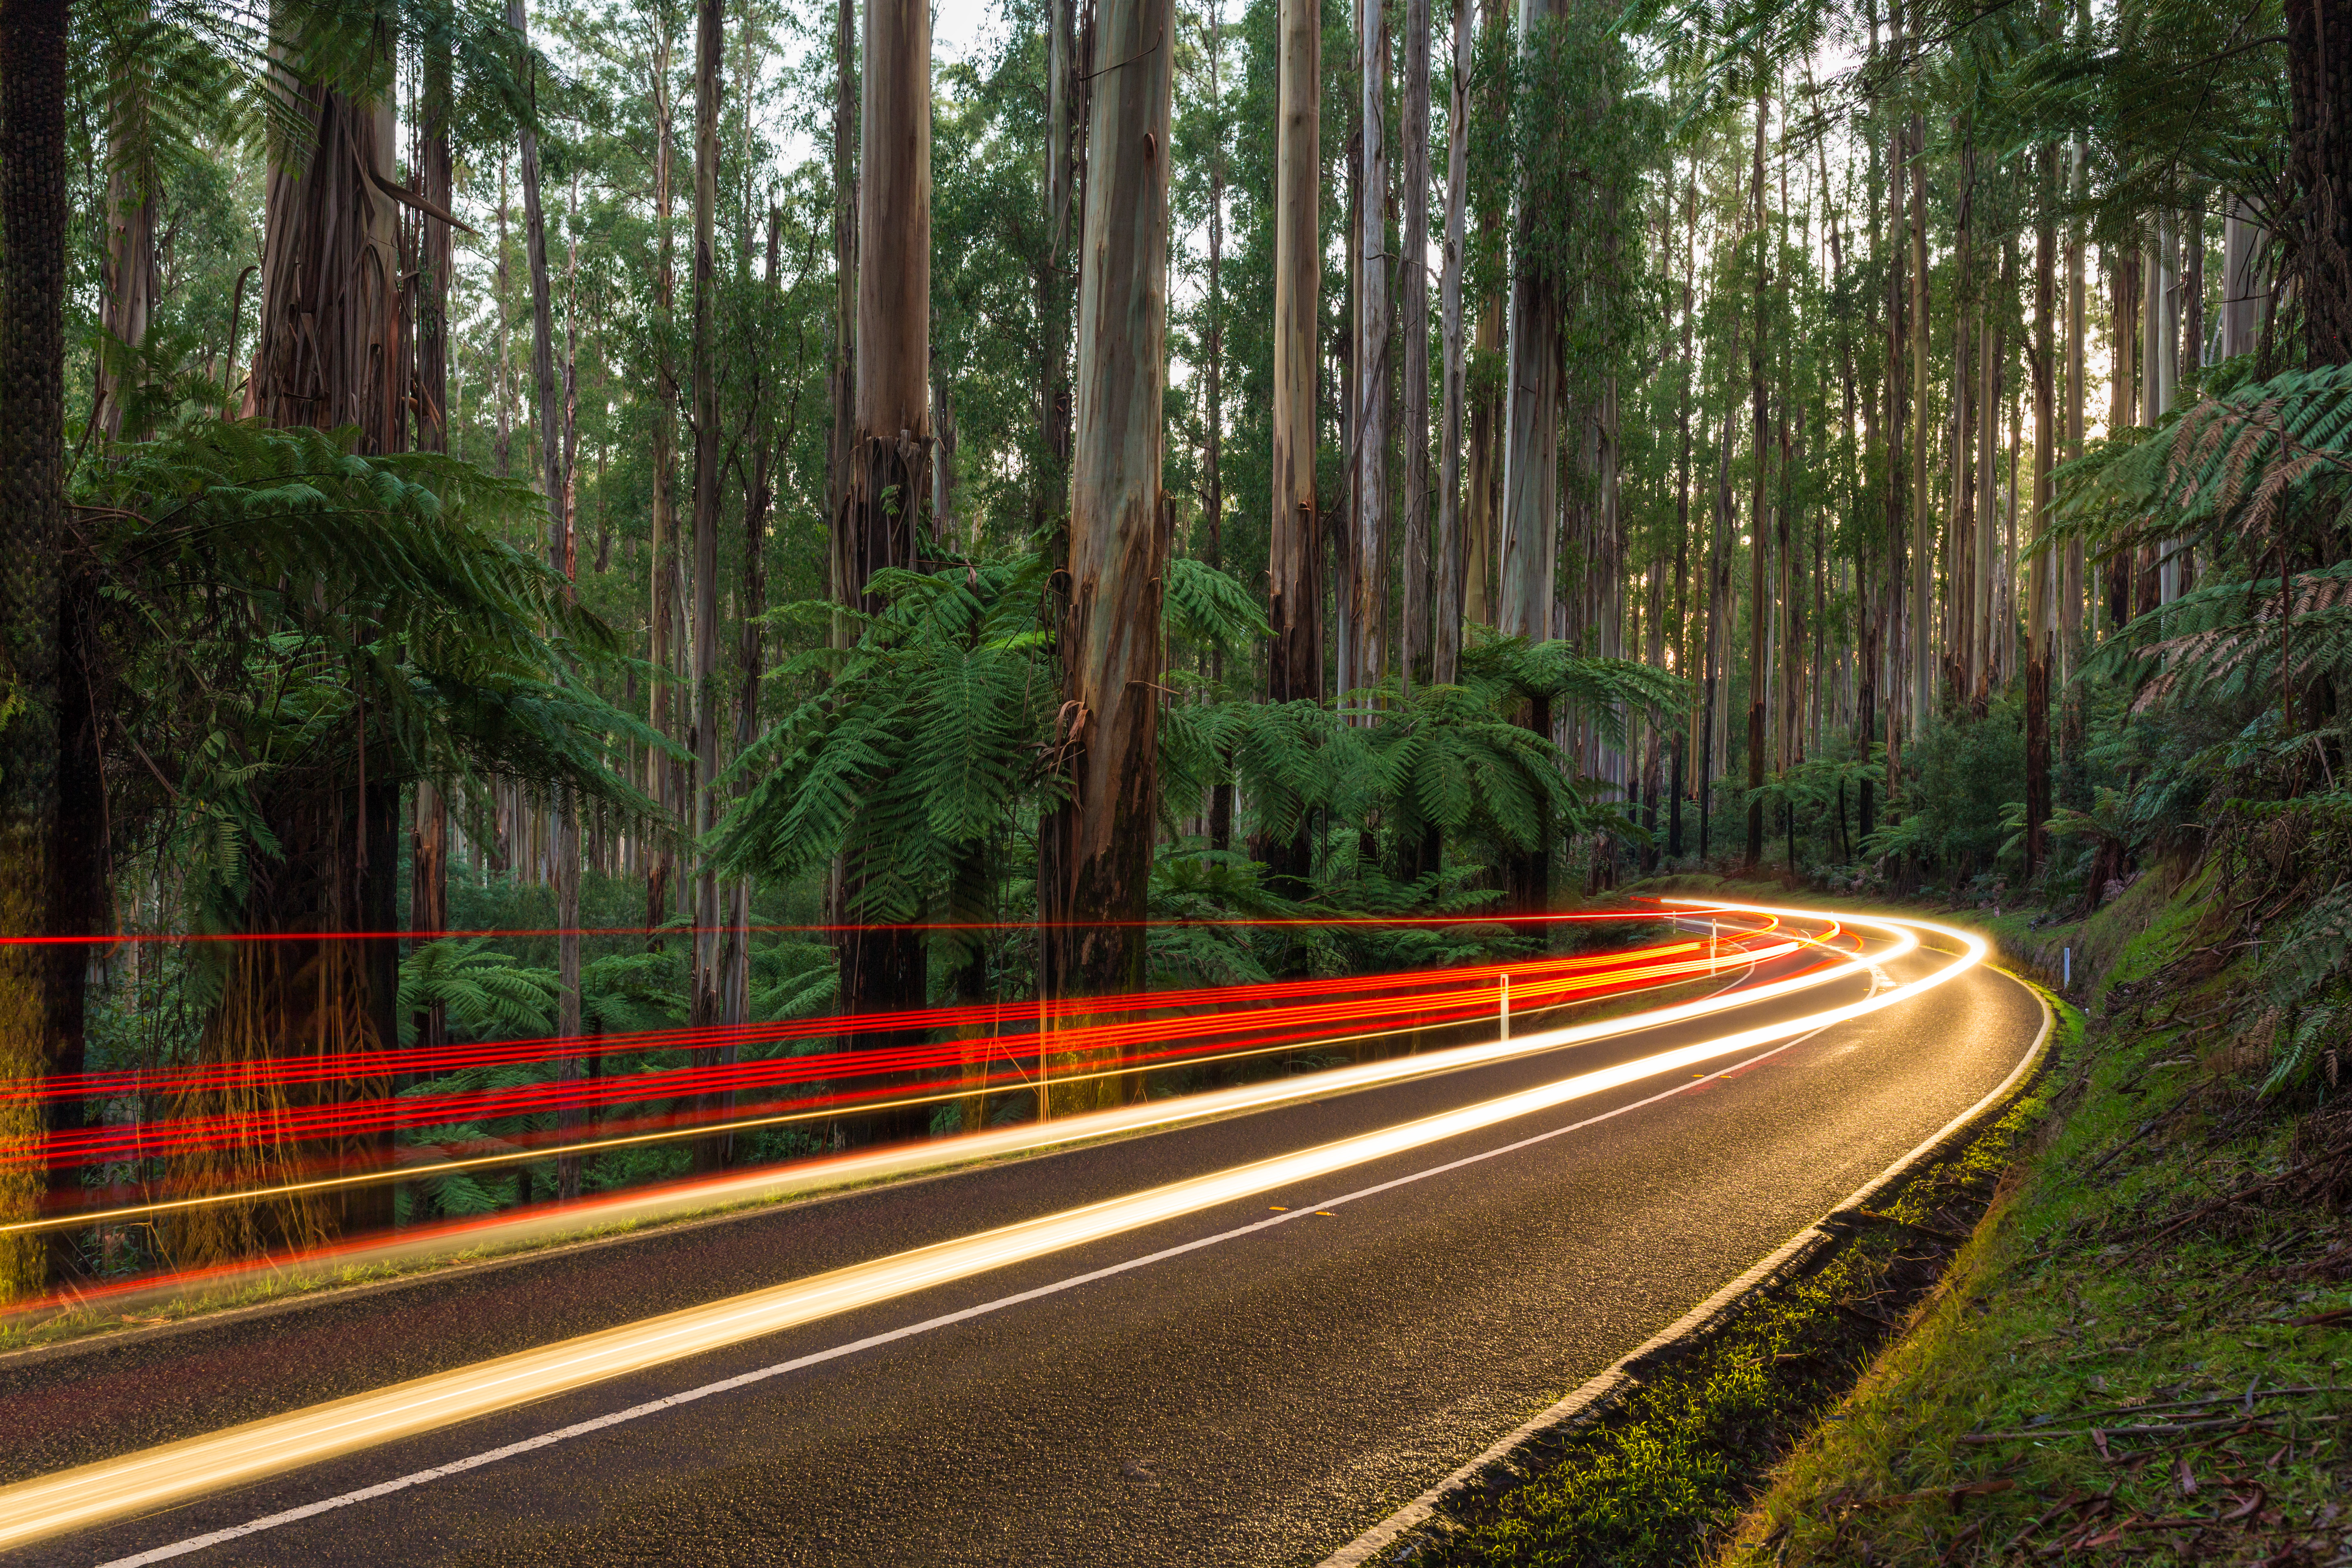 Light trails: Black Spur, a scenic road through the Yarra Ranges National Park, Australia by Diliff